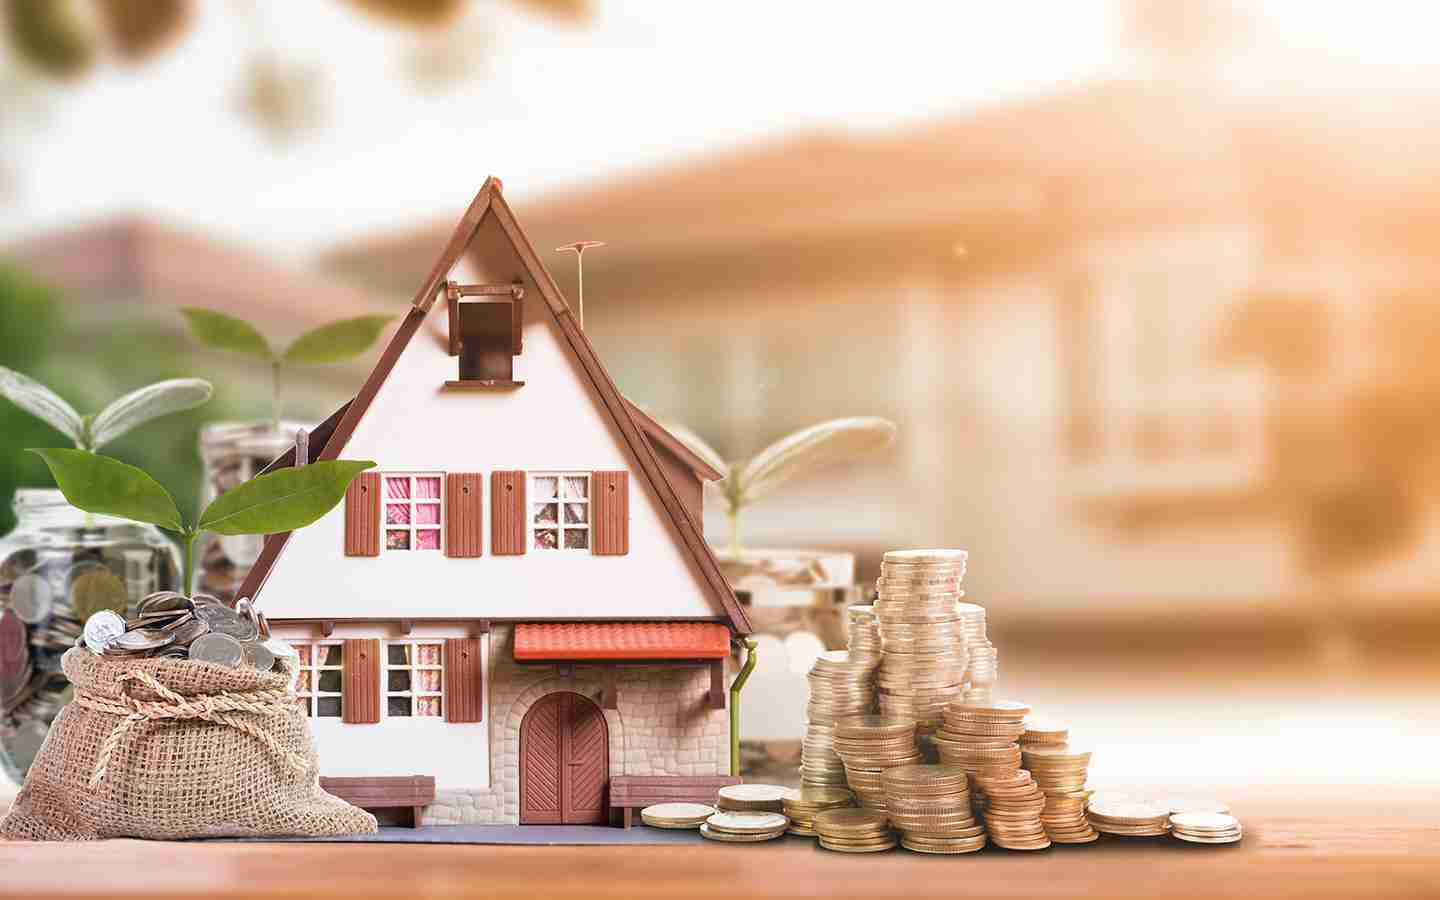 Benefits of investing in Turkish real estate